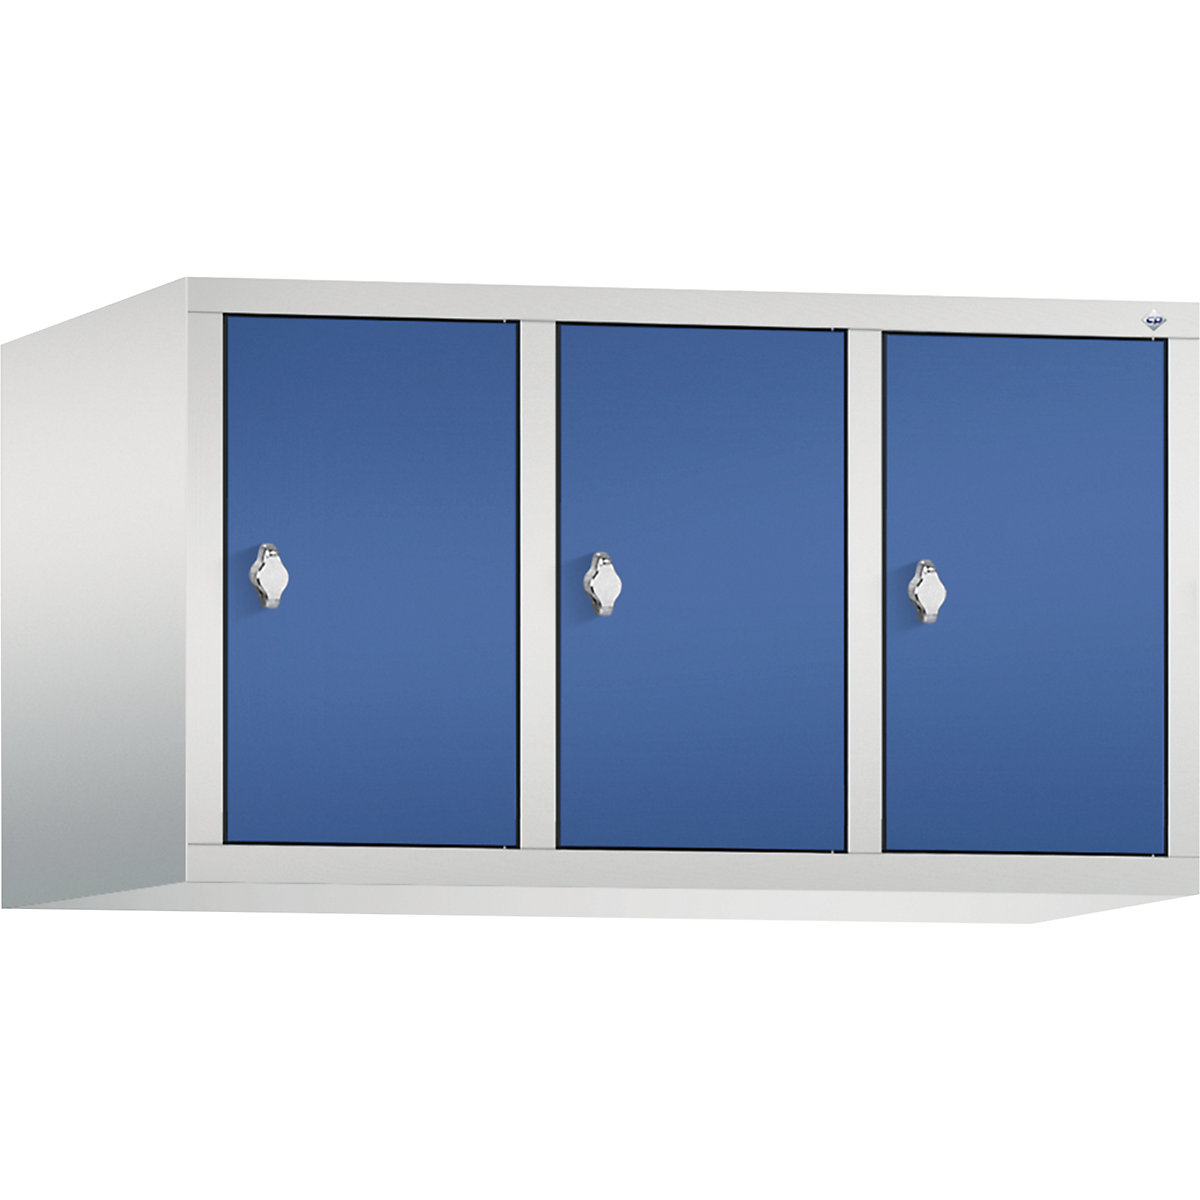 CLASSIC add-on cupboard – C+P, 3 compartments, compartment width 300 mm, light grey / gentian blue-4